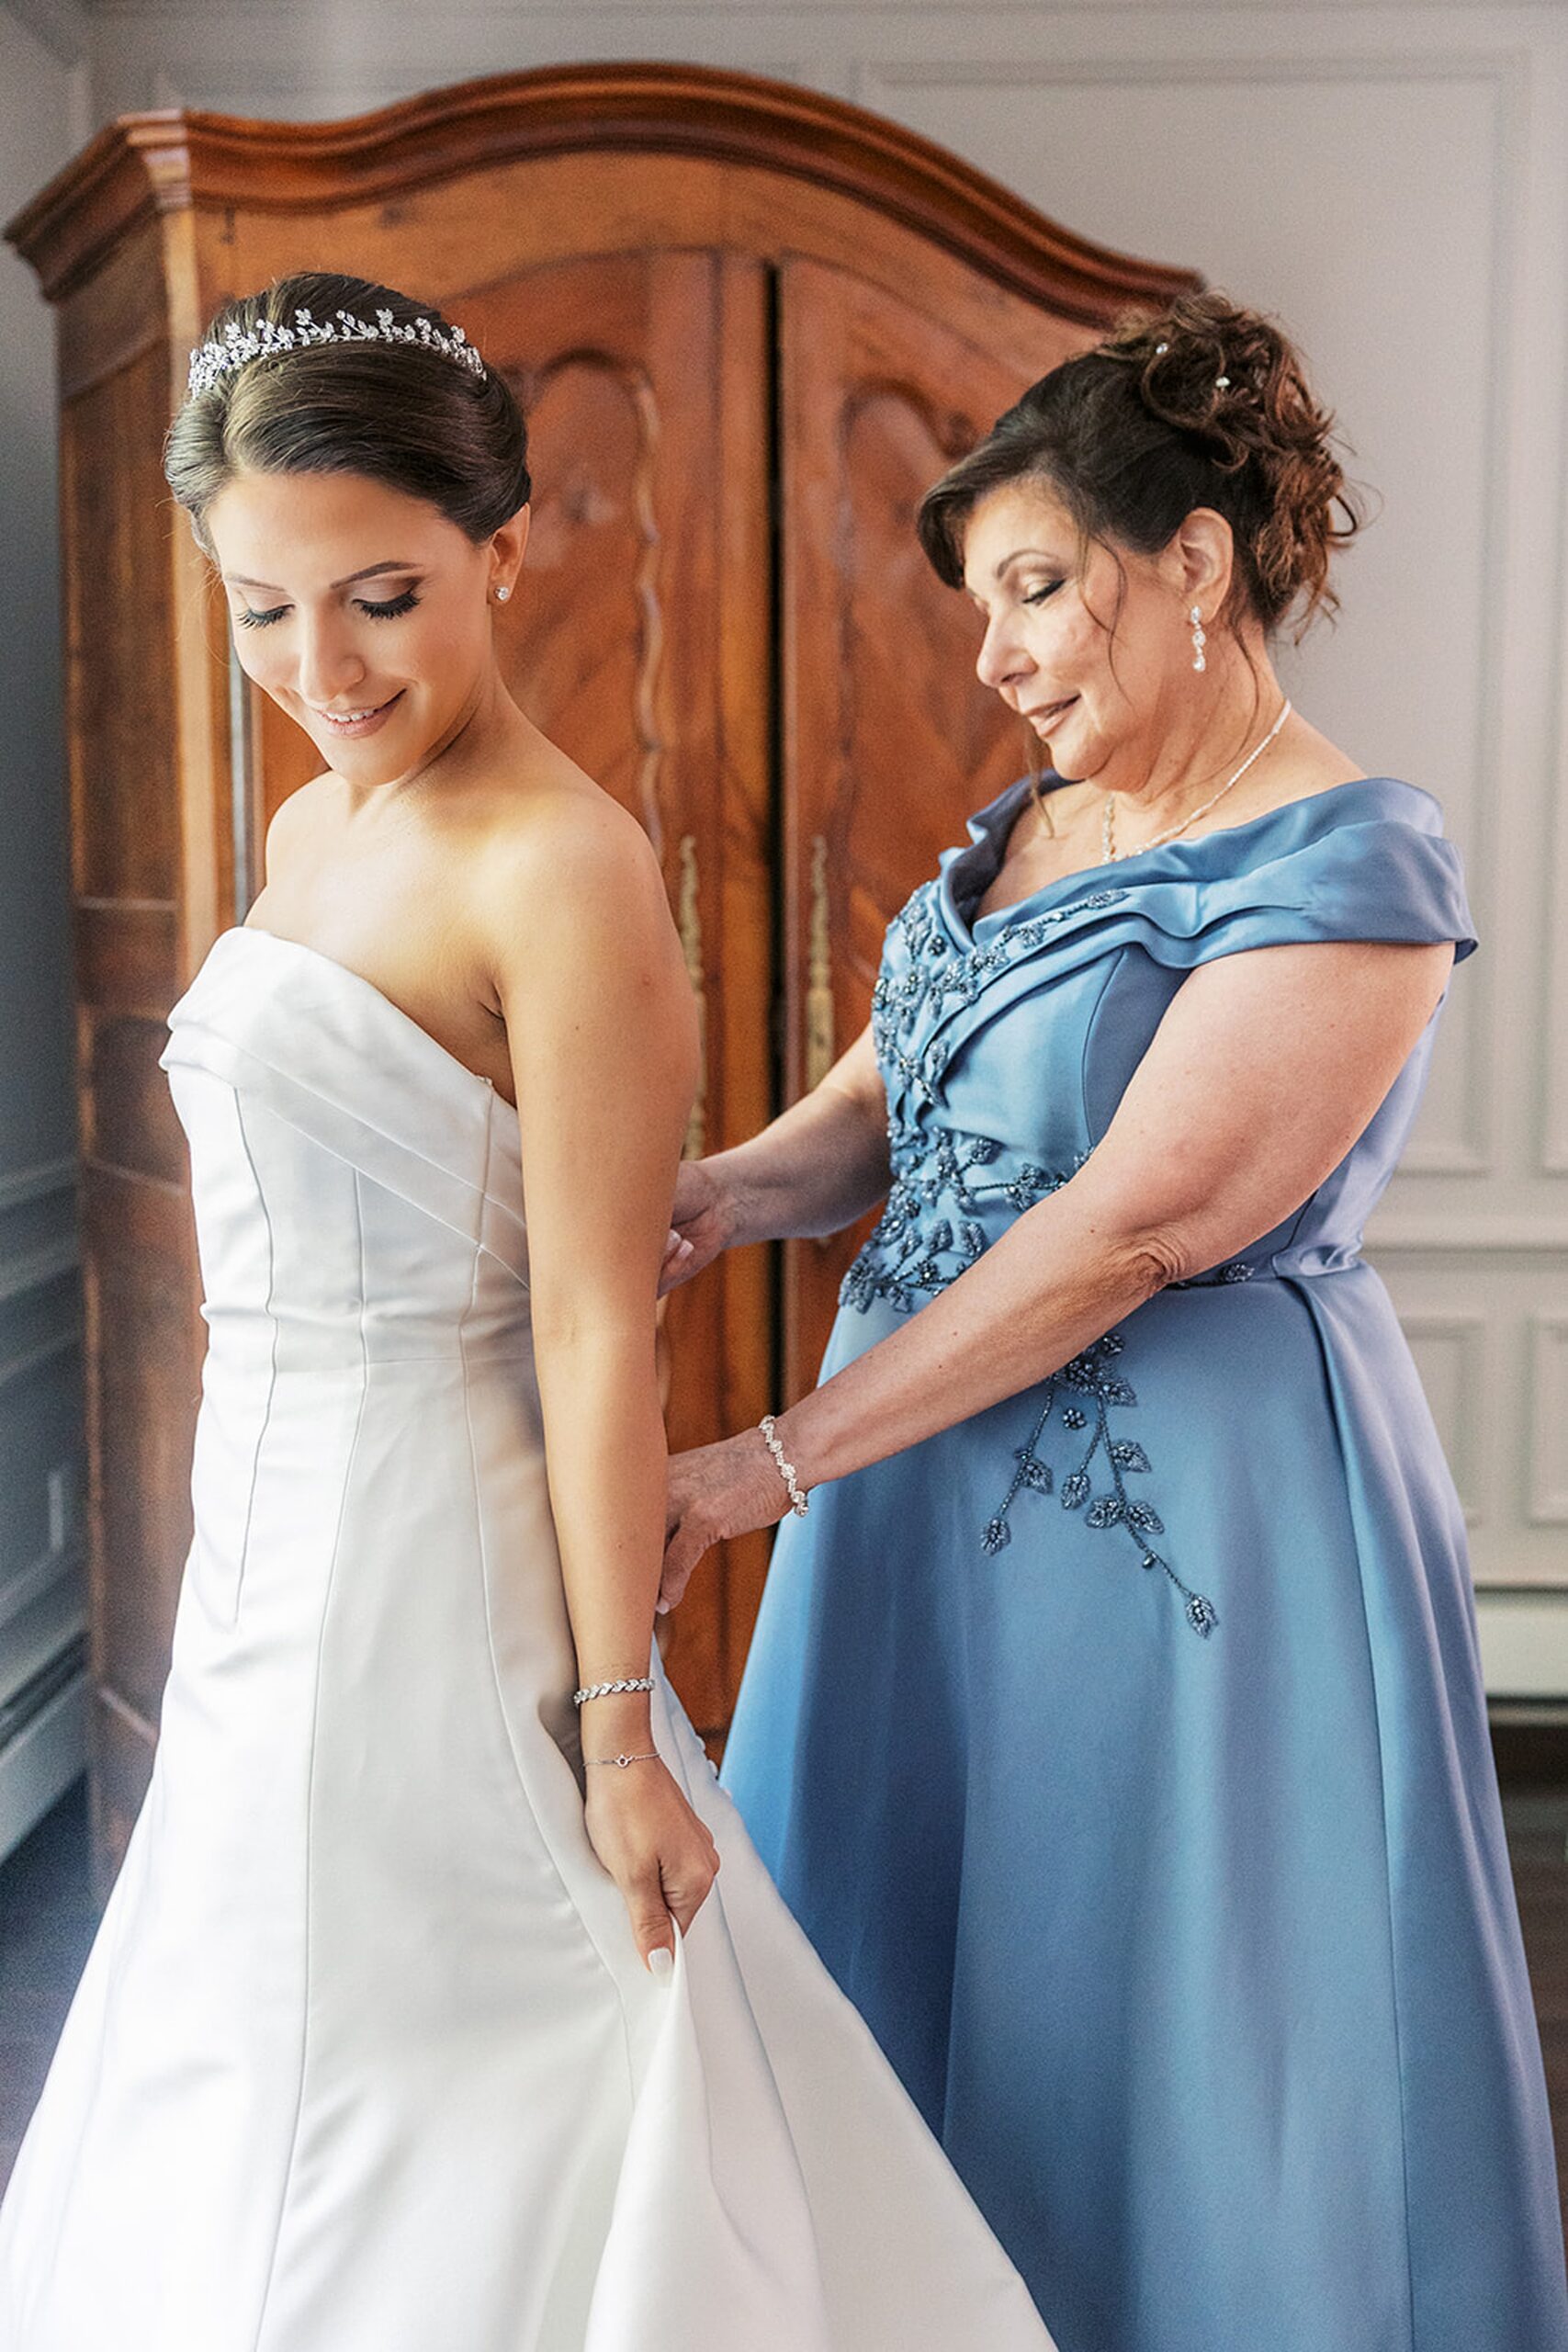 A mother in a blue dress helps zip up her daughter's silk wedding dress in front of a mirror